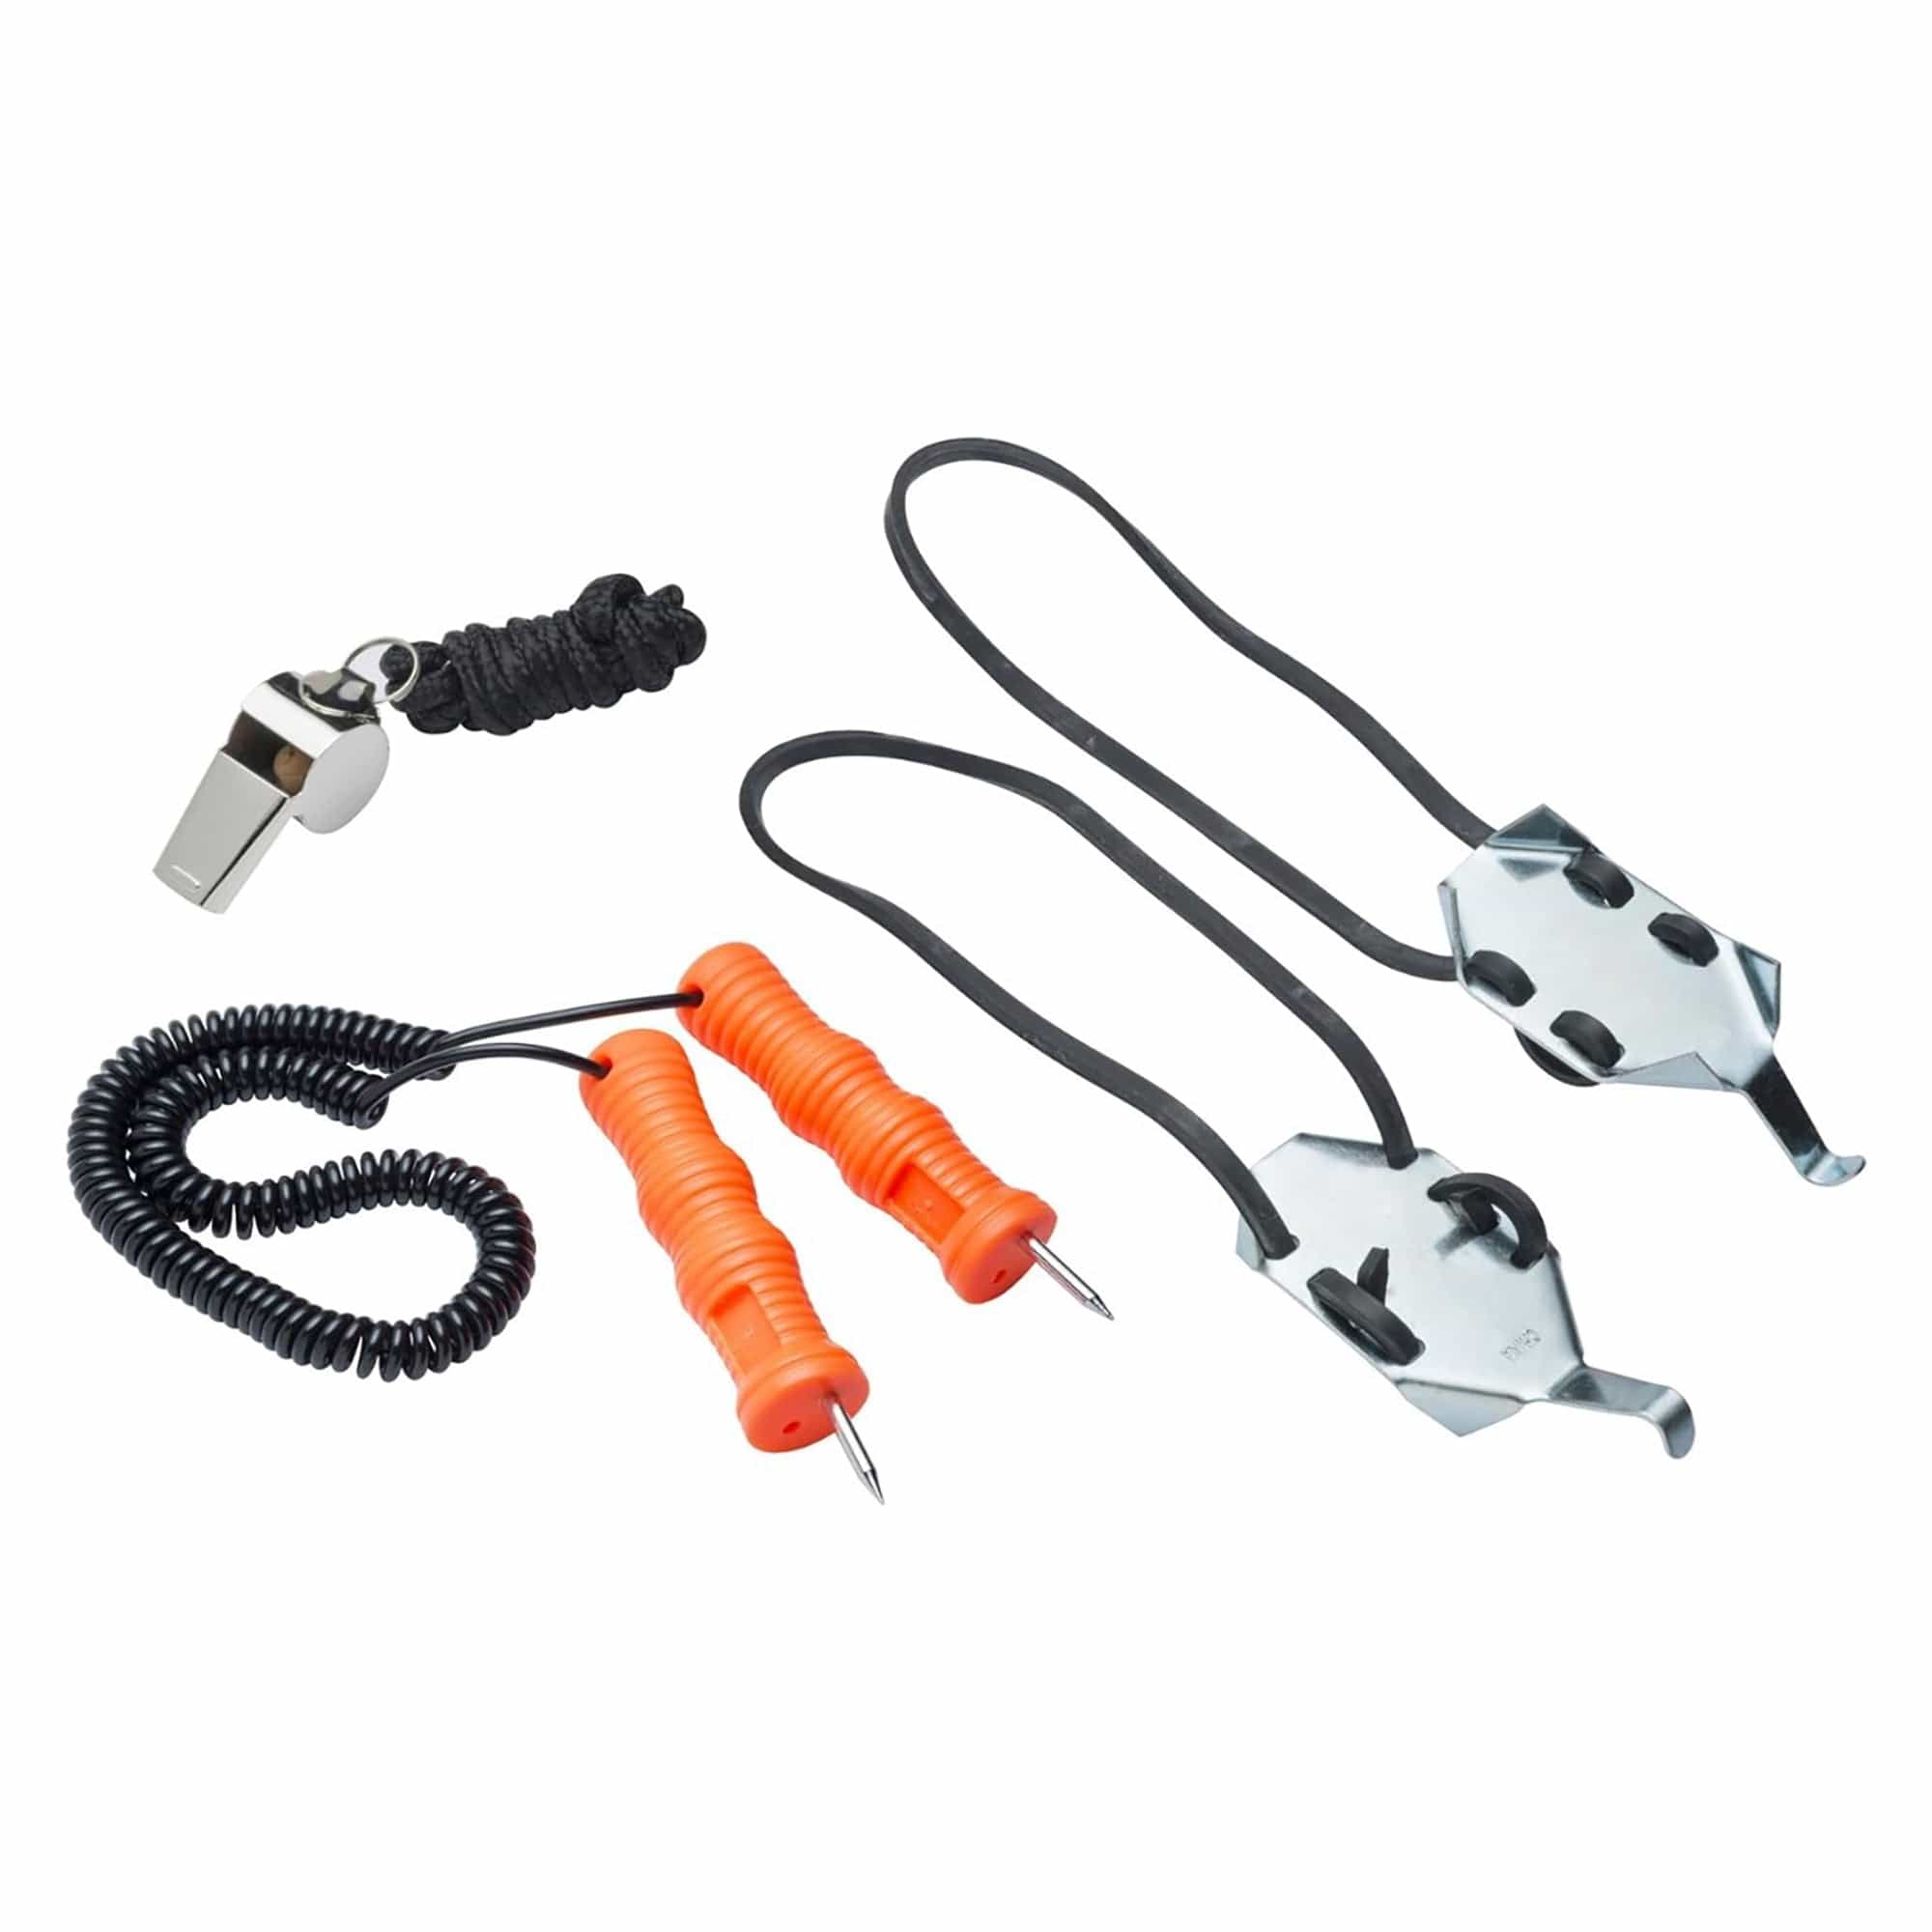 Celsius Ice Fishing ISK-1 Safety Kit